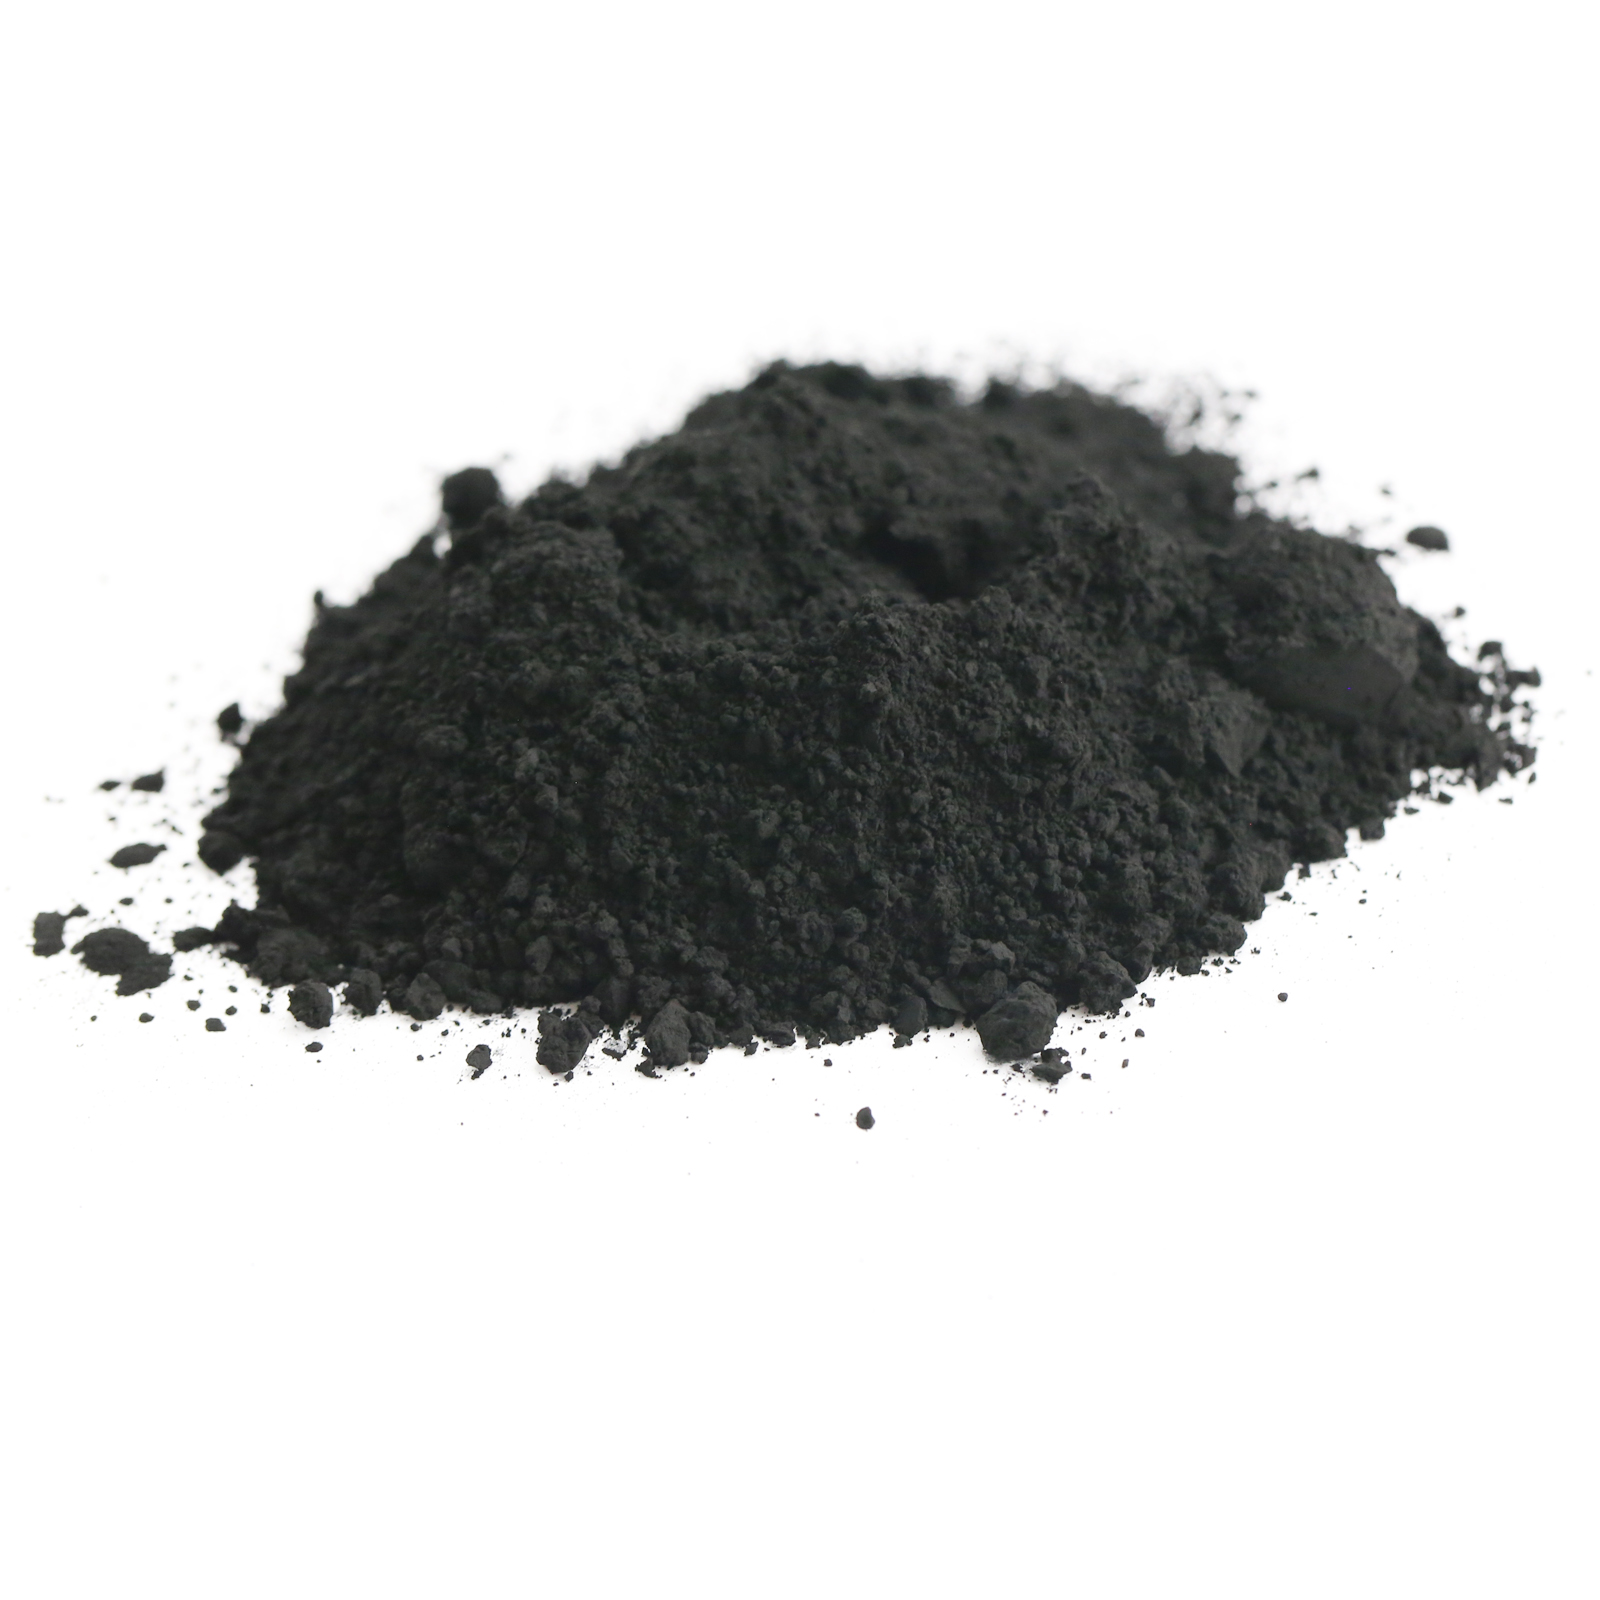 9 Beauty Benefits of Activated Charcoal & How to Use It